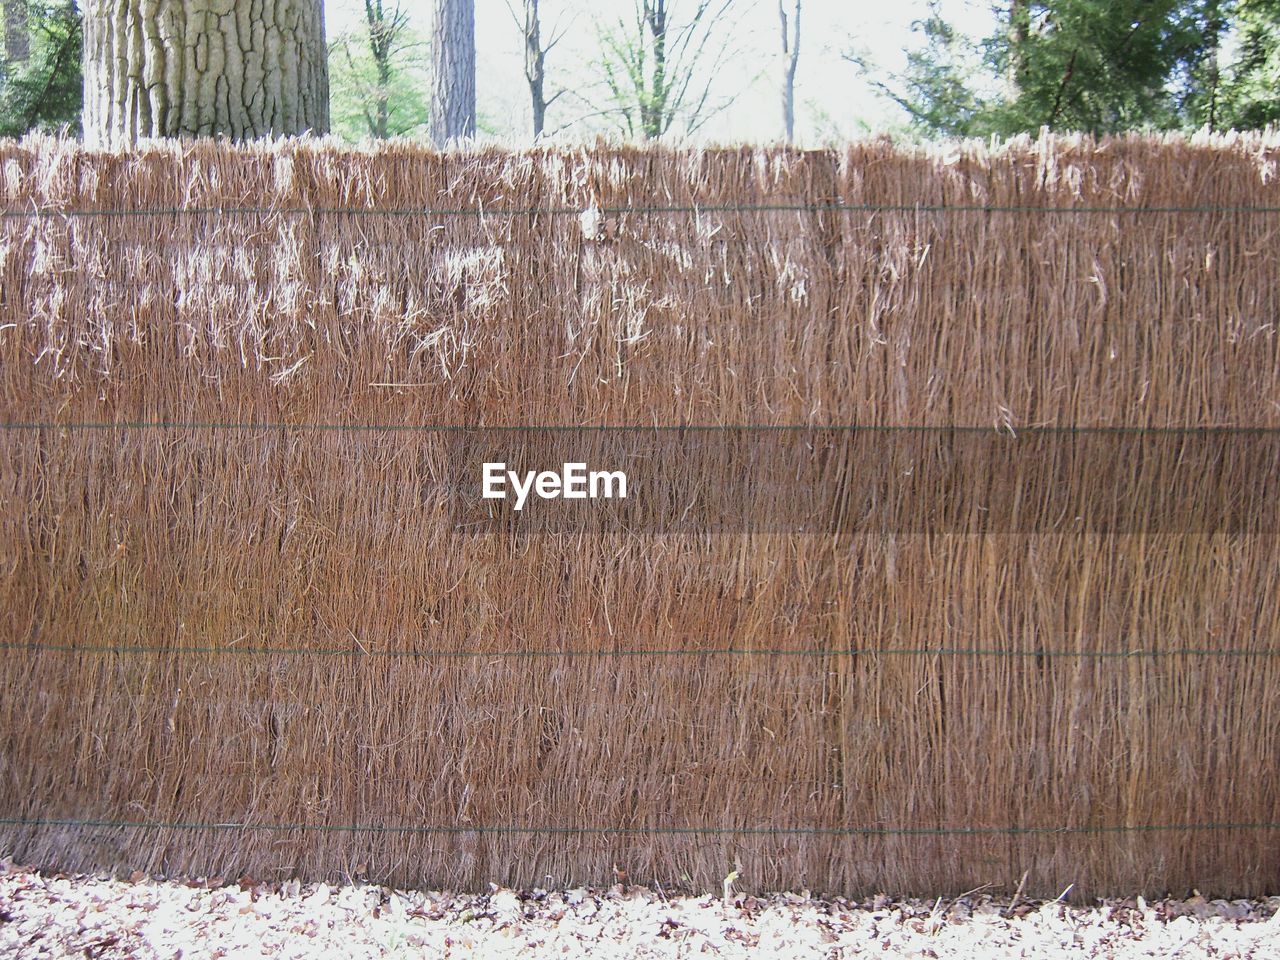 CLOSE-UP OF WOODEN FENCE ON FIELD